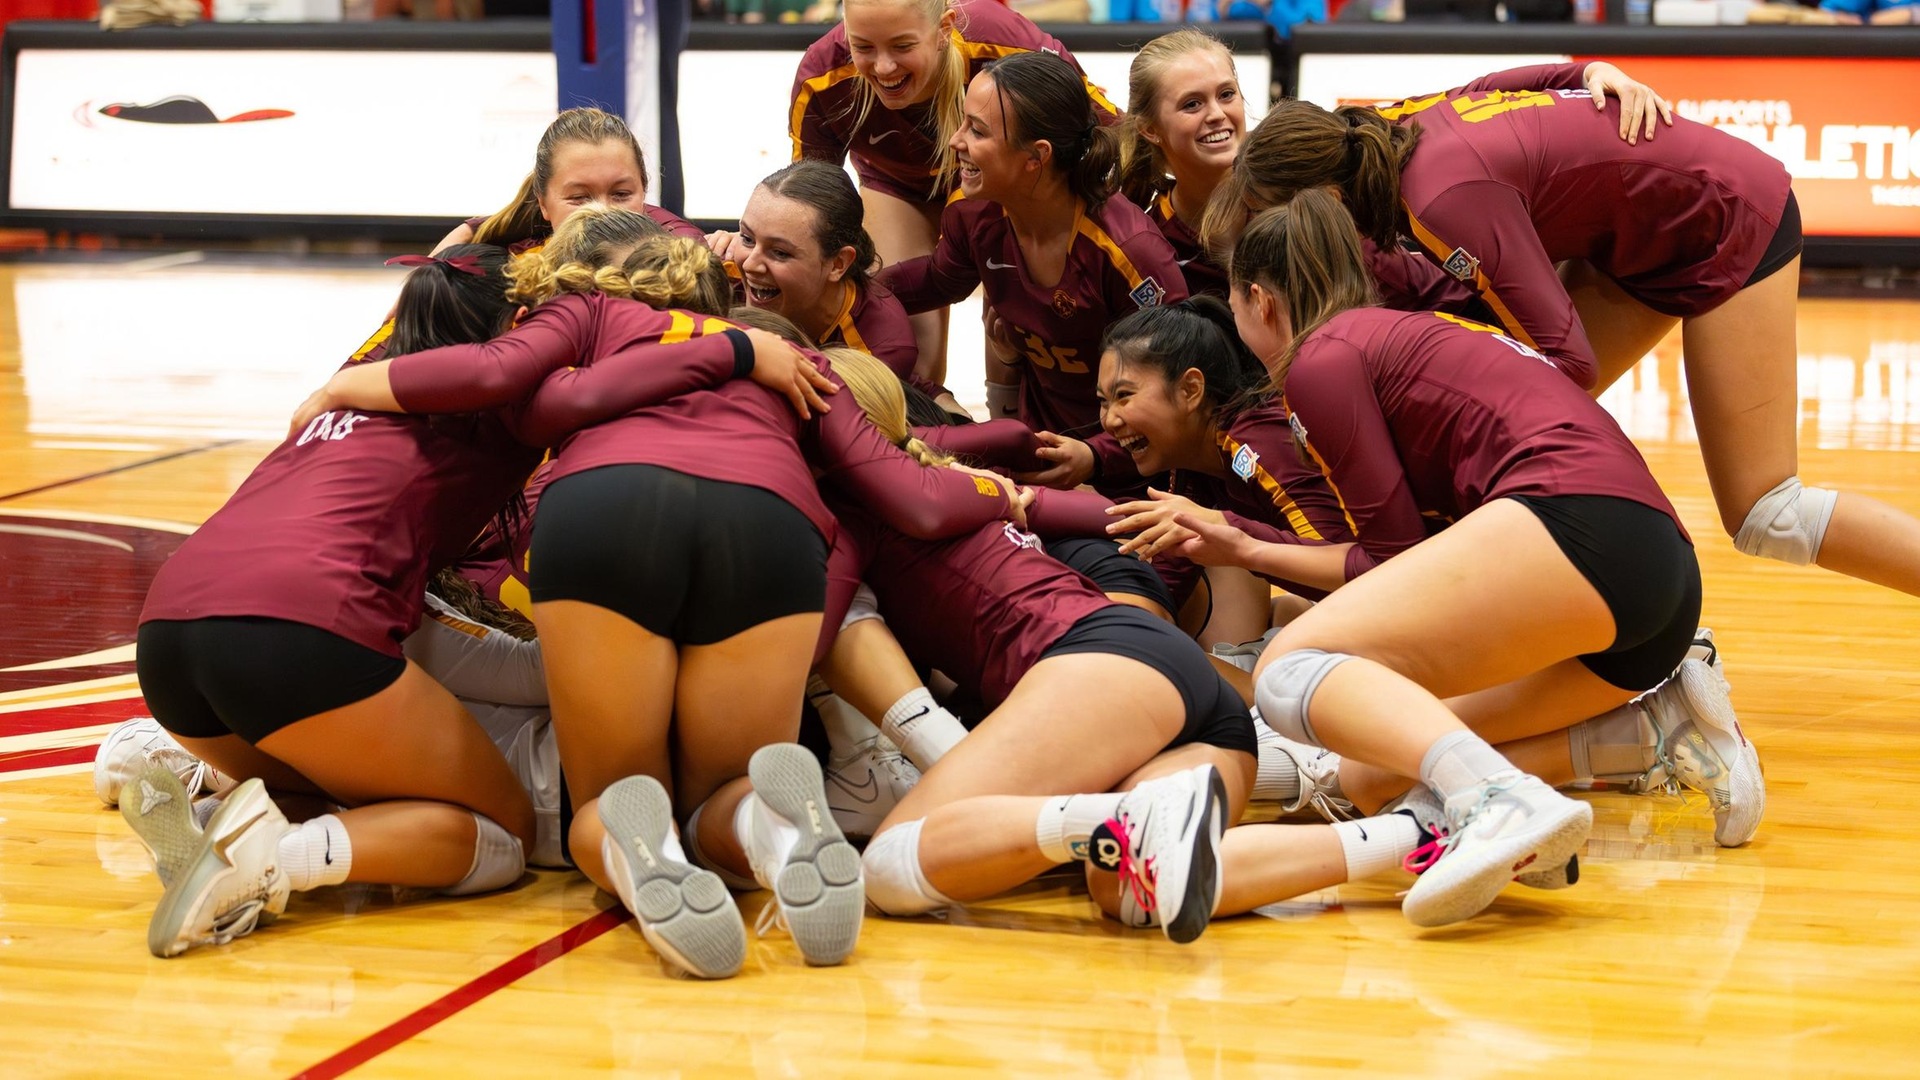 CMS celebrates its regional title (photo by Ollie Piazza)